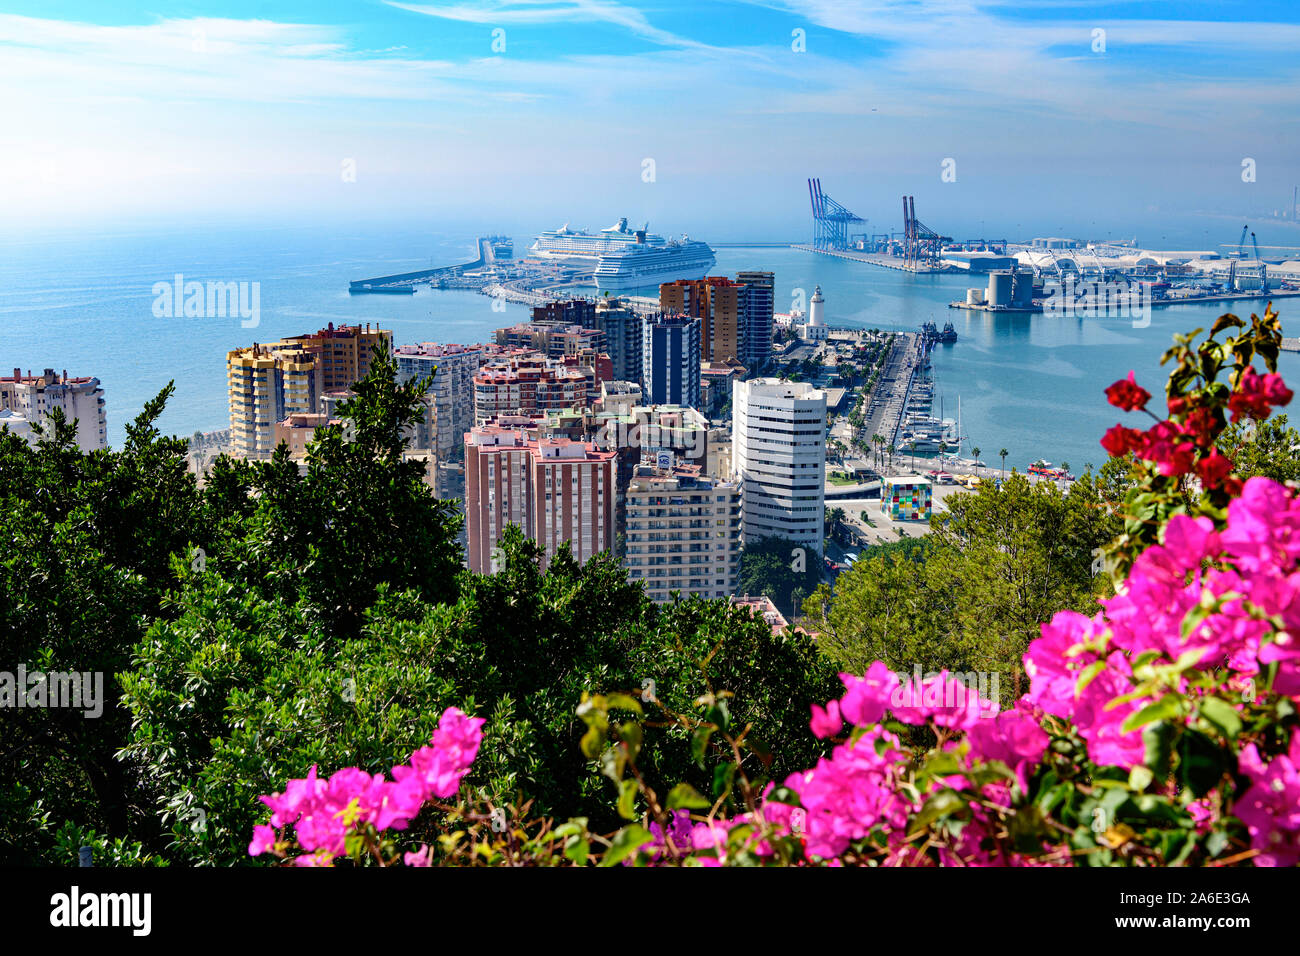 Overview of City and Port of Malaga Spain Stock Photo